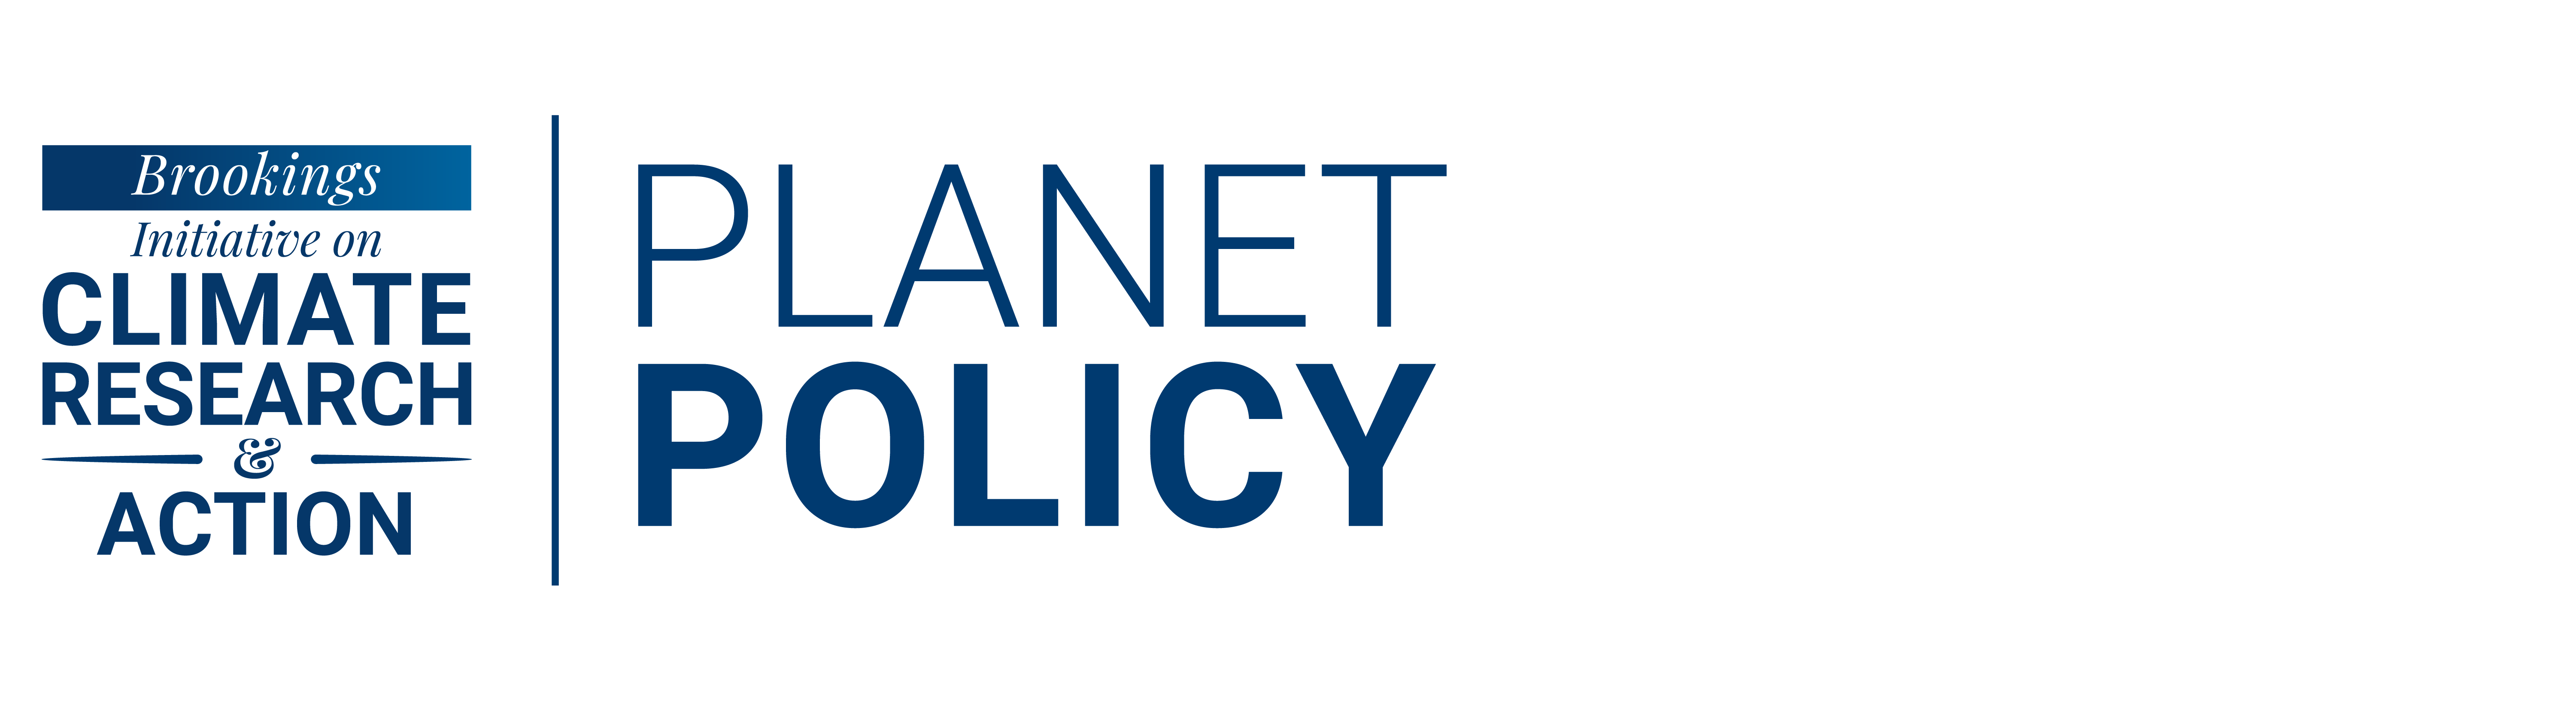 Planet_Policy_signup_page-1